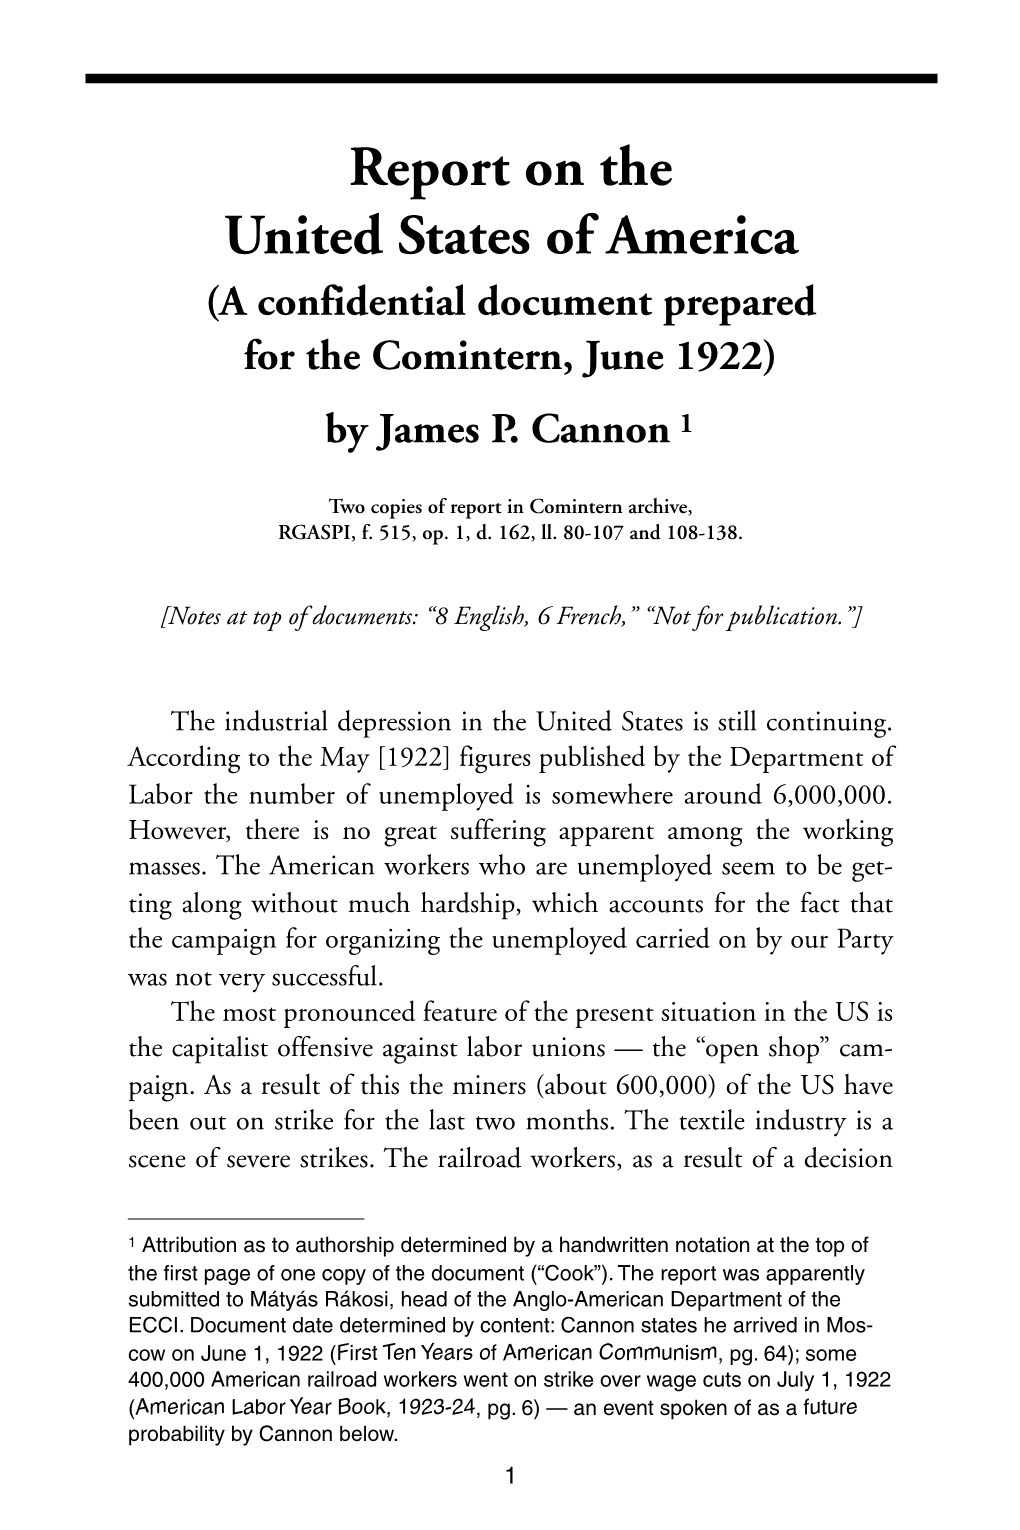 Report on the United States of America (A Confidential Document Prepared for the Comintern, June 1922) by James P